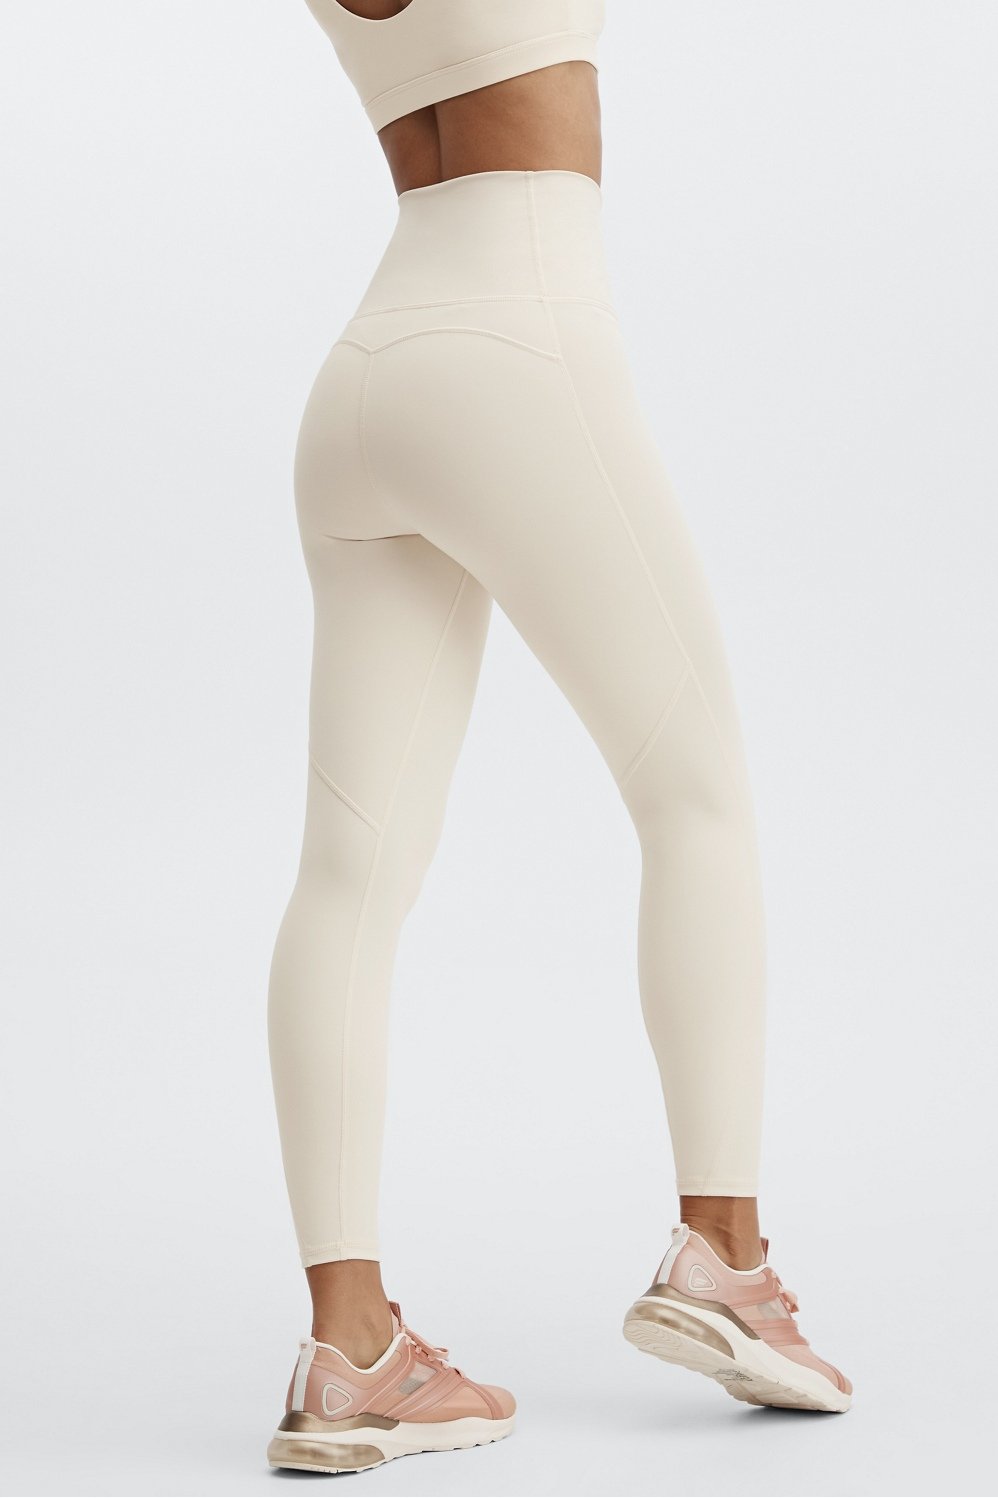 Fabletics Pure Luxe 7/8 Maternity Leggings Black Size L - $15 (81% Off  Retail) - From Sheray